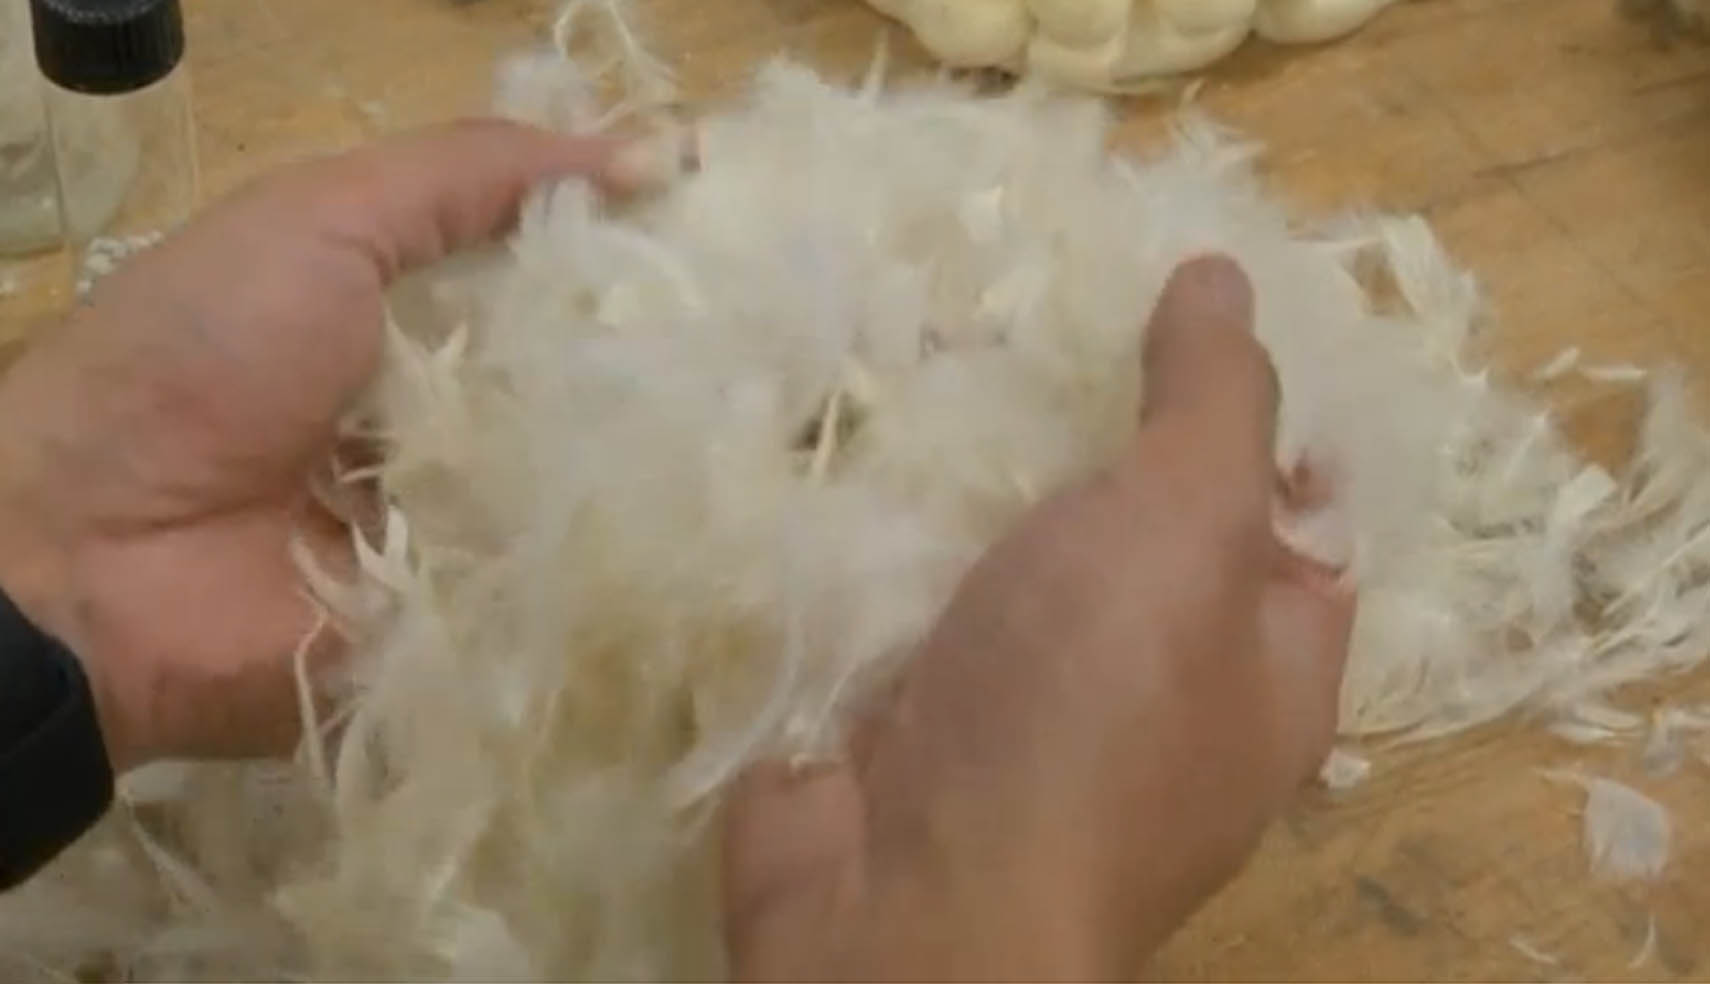 London-based start-up Aeropowder is developing a method to turn thousands of tonnes of waste chicken feathers into useful materials, including an effective thermal insulator. (Photo courtesy to Reuters video)